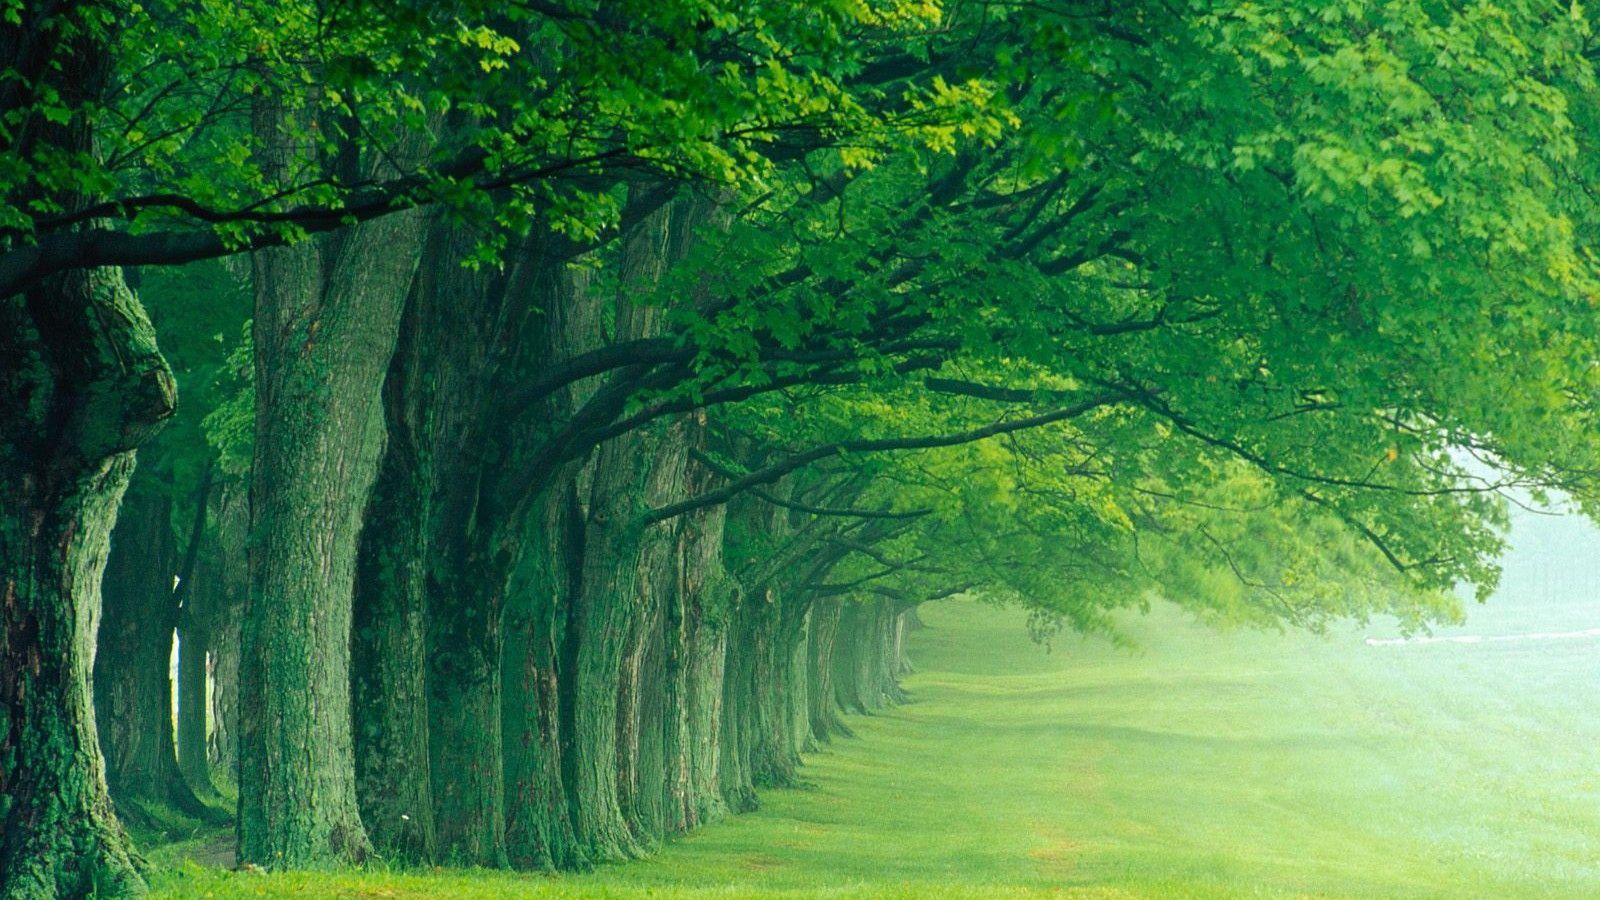 All Green Trees in One Line and Living Toward One Direction, a